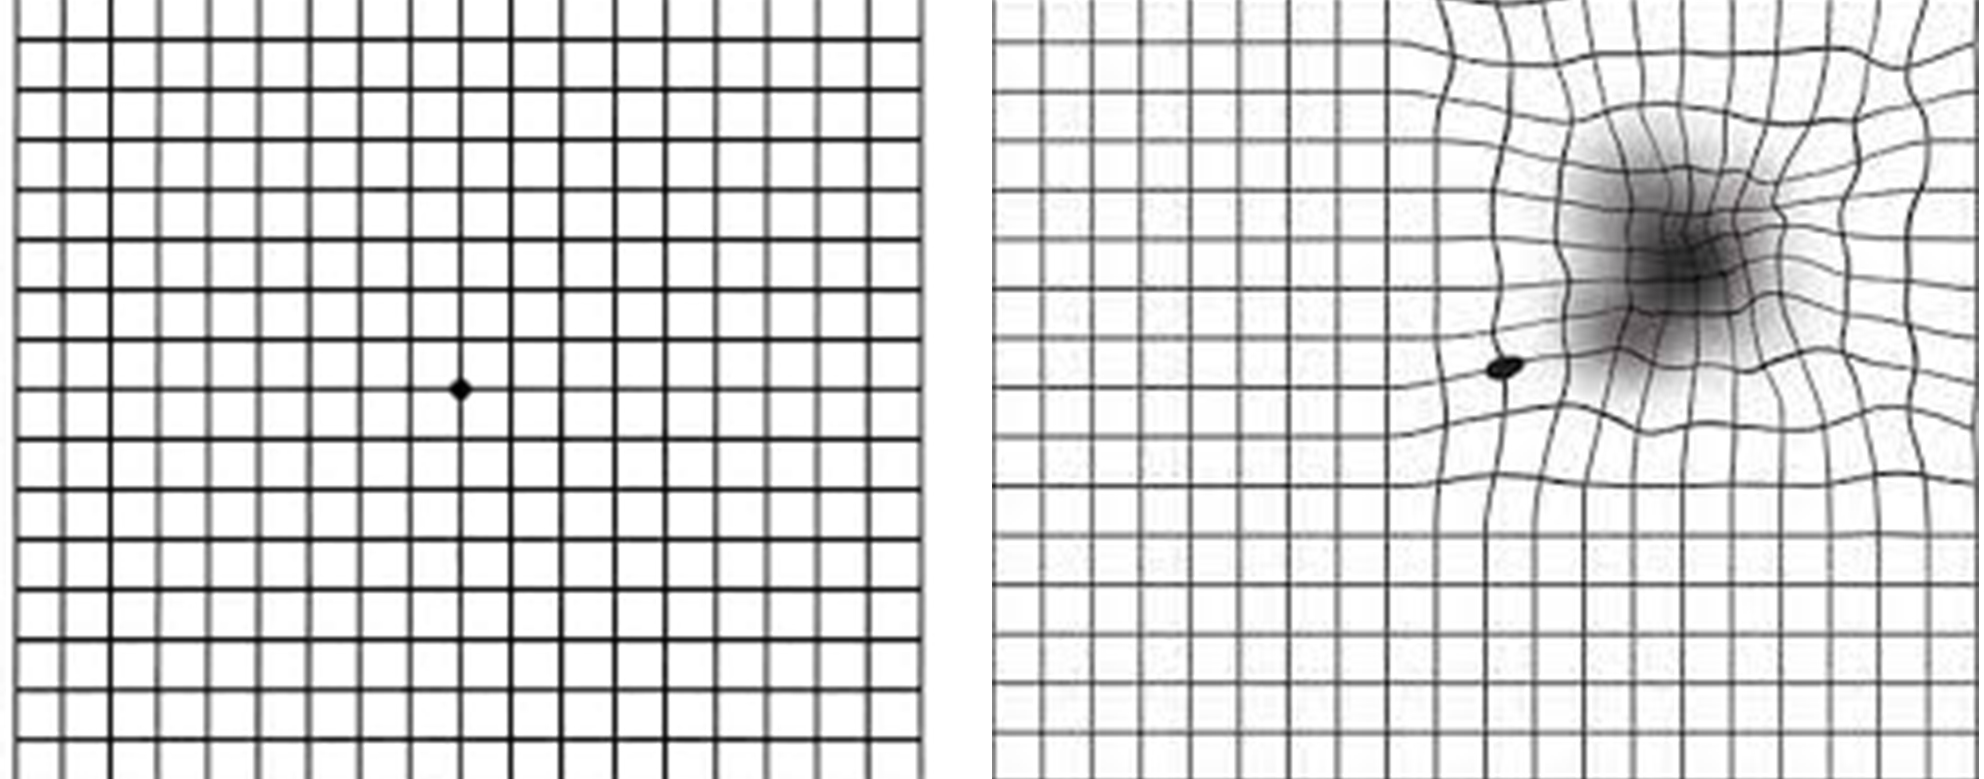 Amsler grid as seen by a normal eye (left) and one with wet age-related macular degeneration (ARMD) (right), demonstrating distortion and a paracentral scotoma